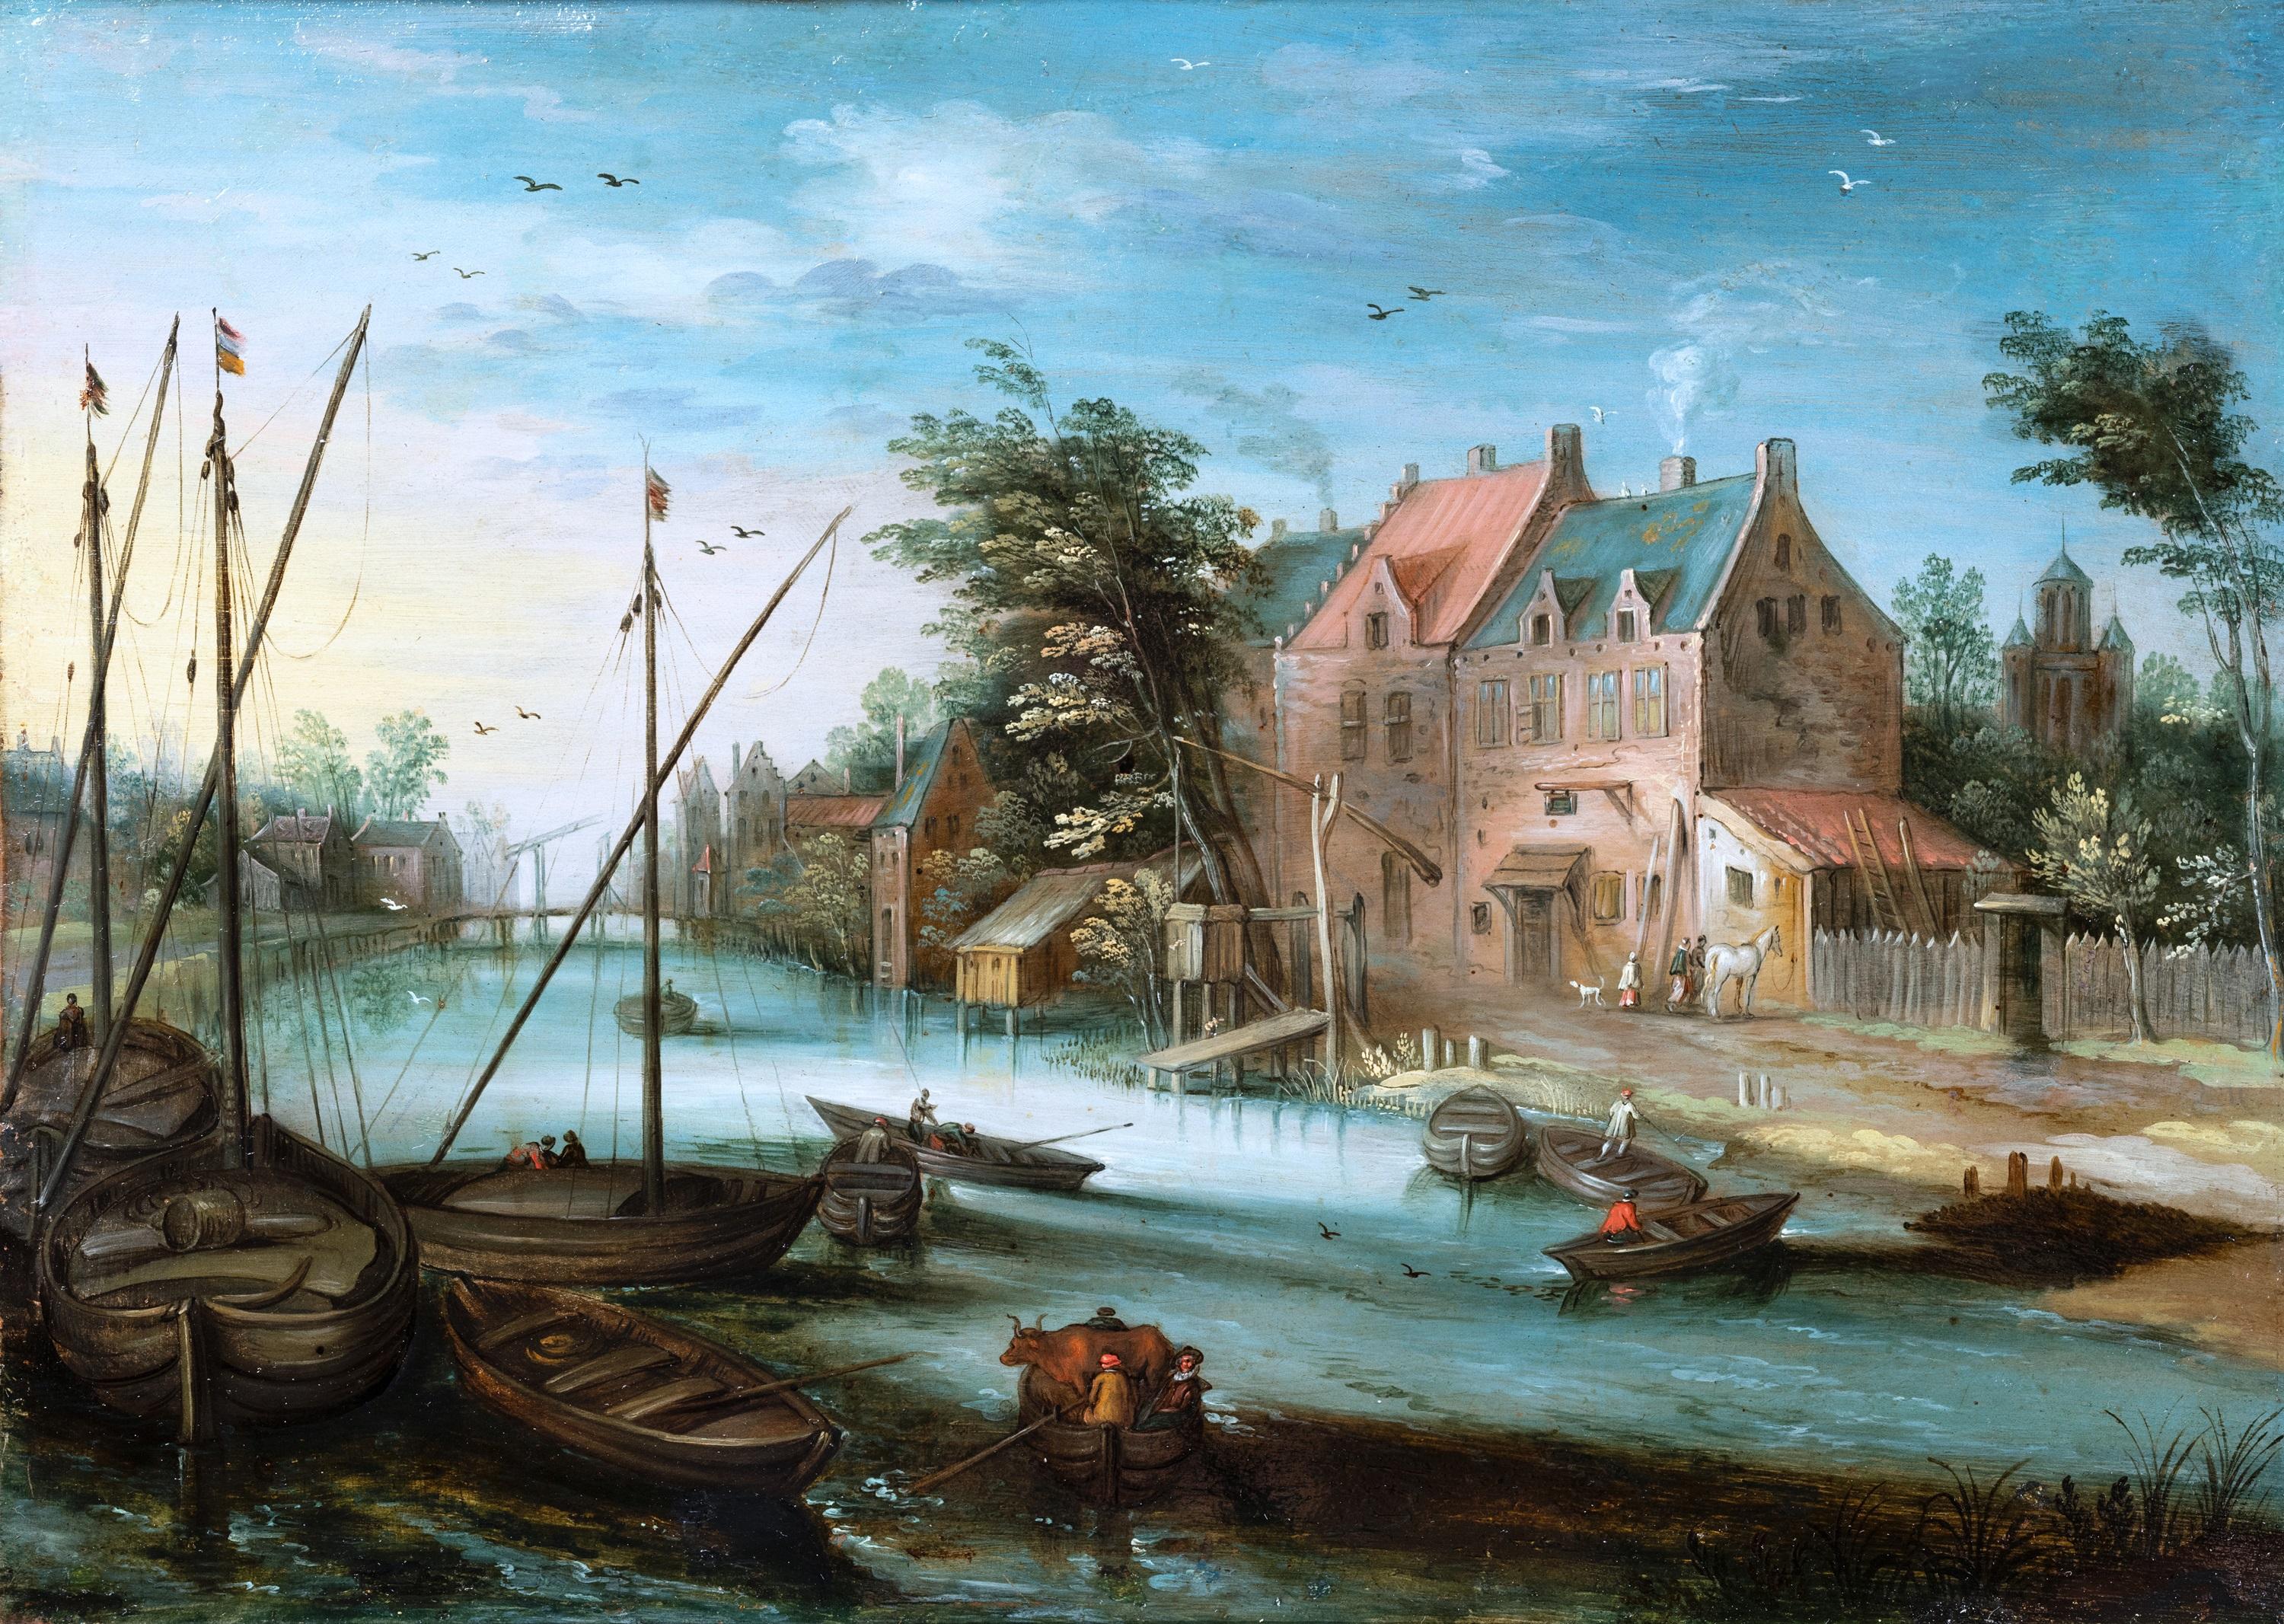 River landscape, studio of Jan Brueghel the Younger  17th century Antwerp school - Painting by Studio of Jan Brueghel the Younger